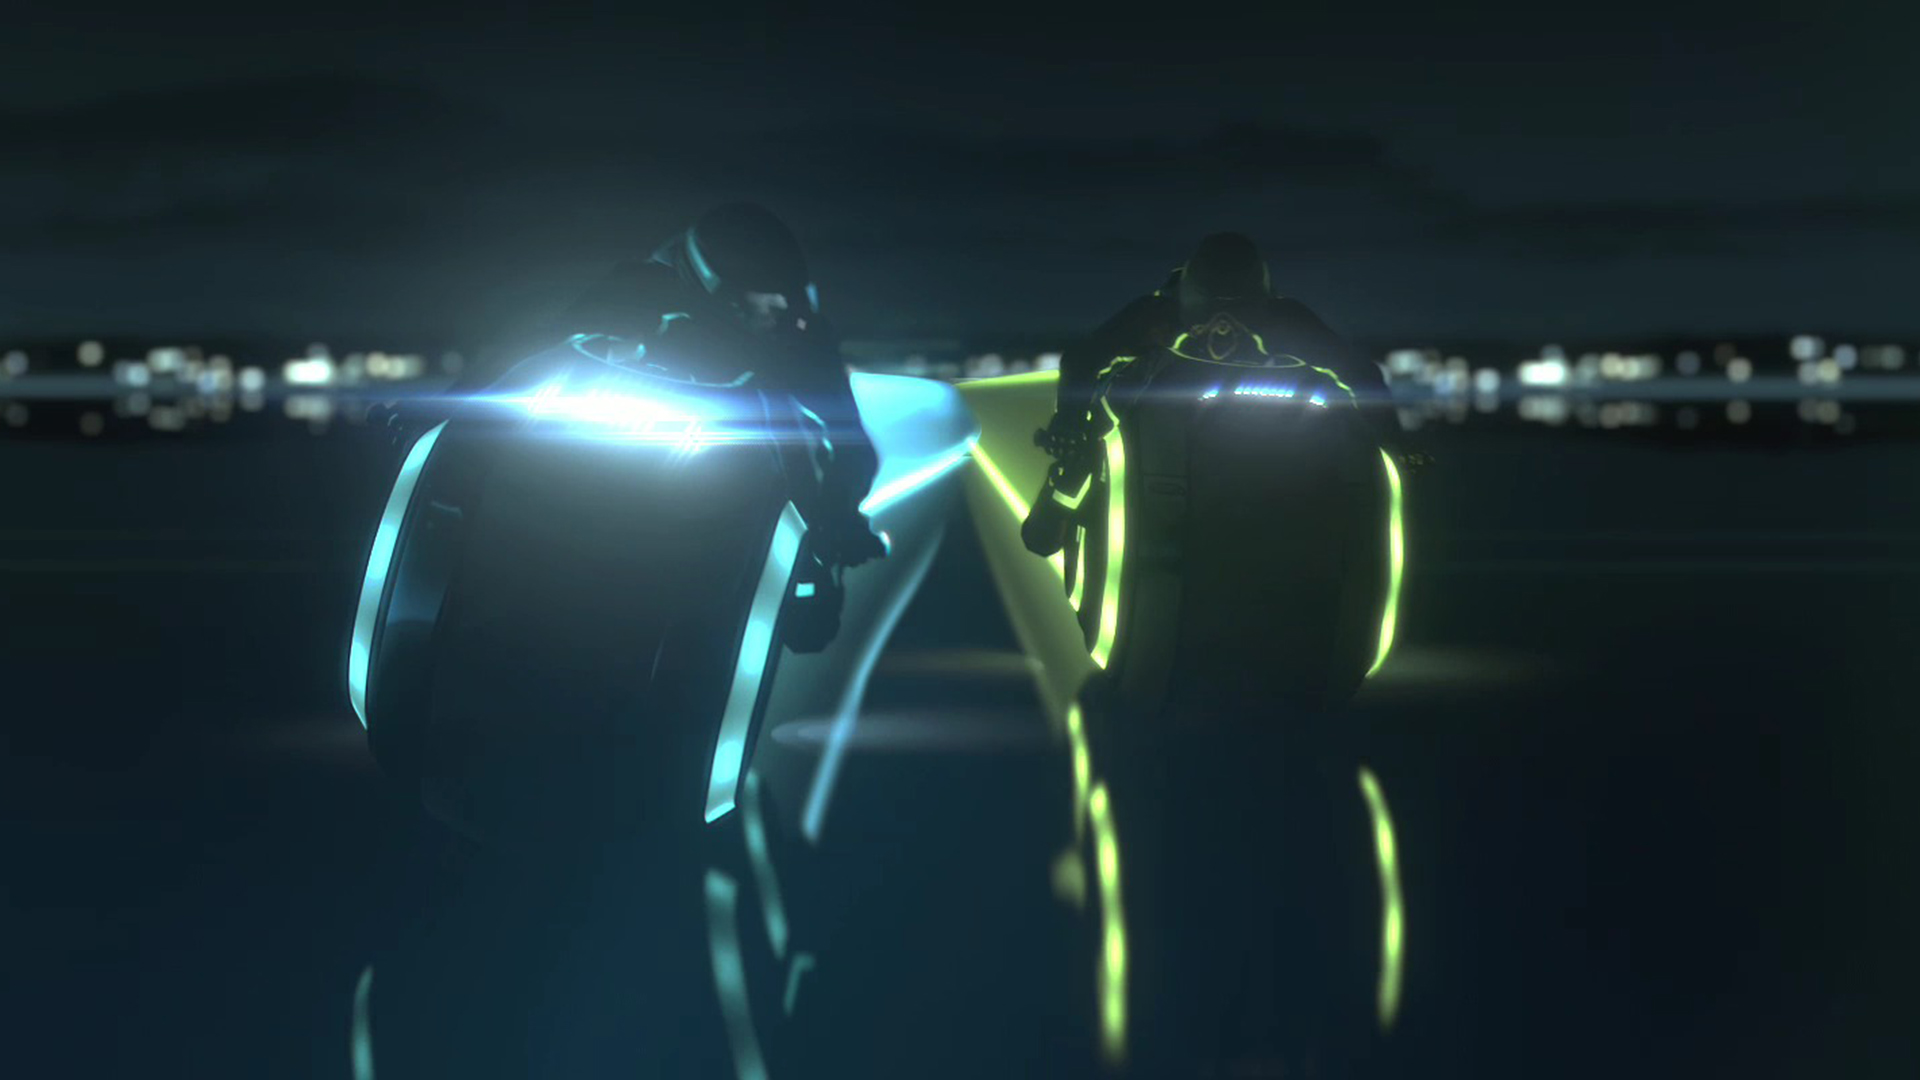 Tron Legacy Desktop Wallpapers for HD Widescreen and Mobile 1920x1080